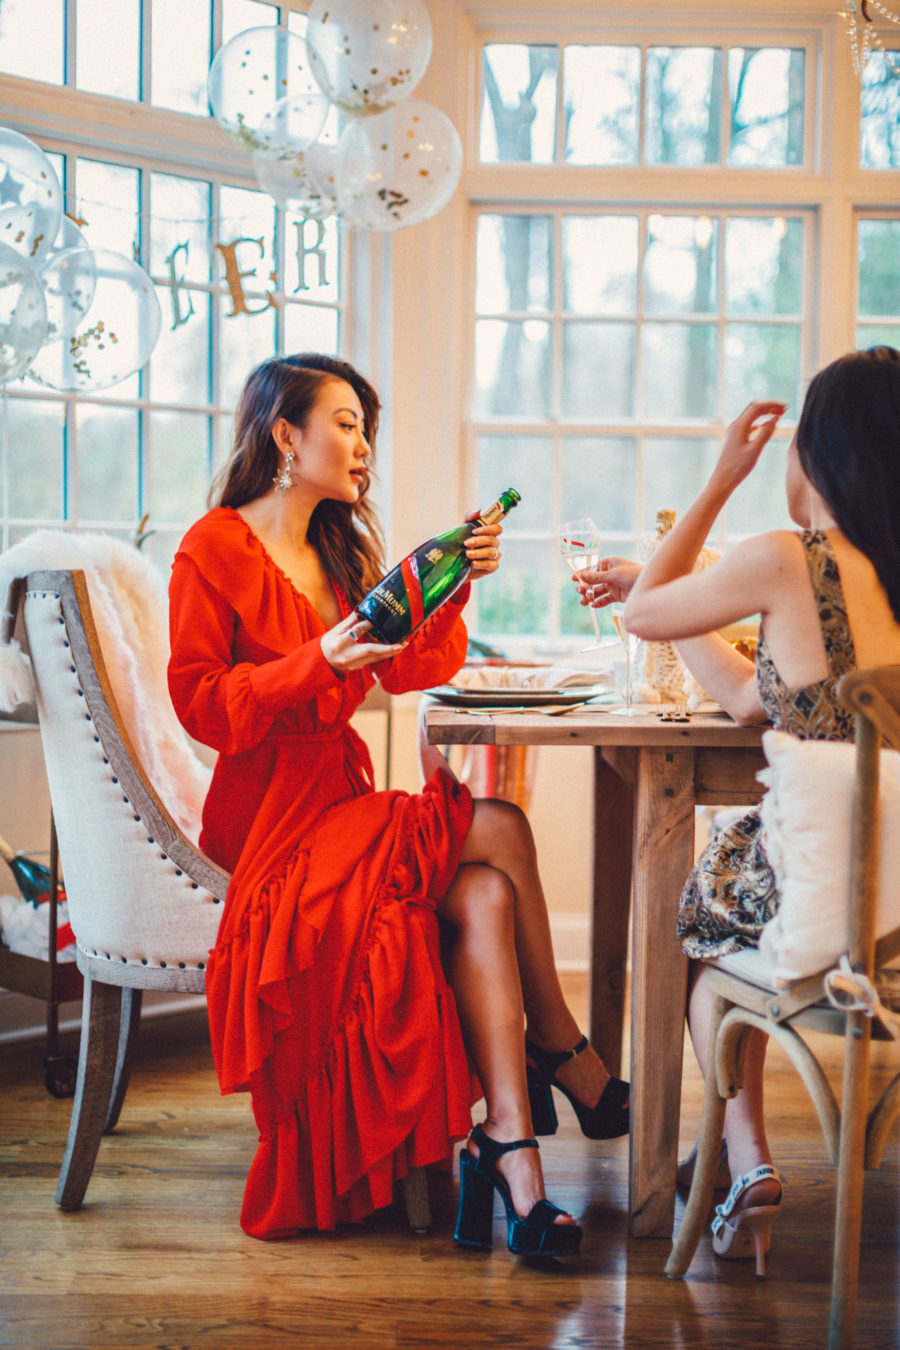 fashion blogger jessica wang features her favorite holiday party shoes featuring laurence dacade velvet green platform sandals // Notjessfashion.com